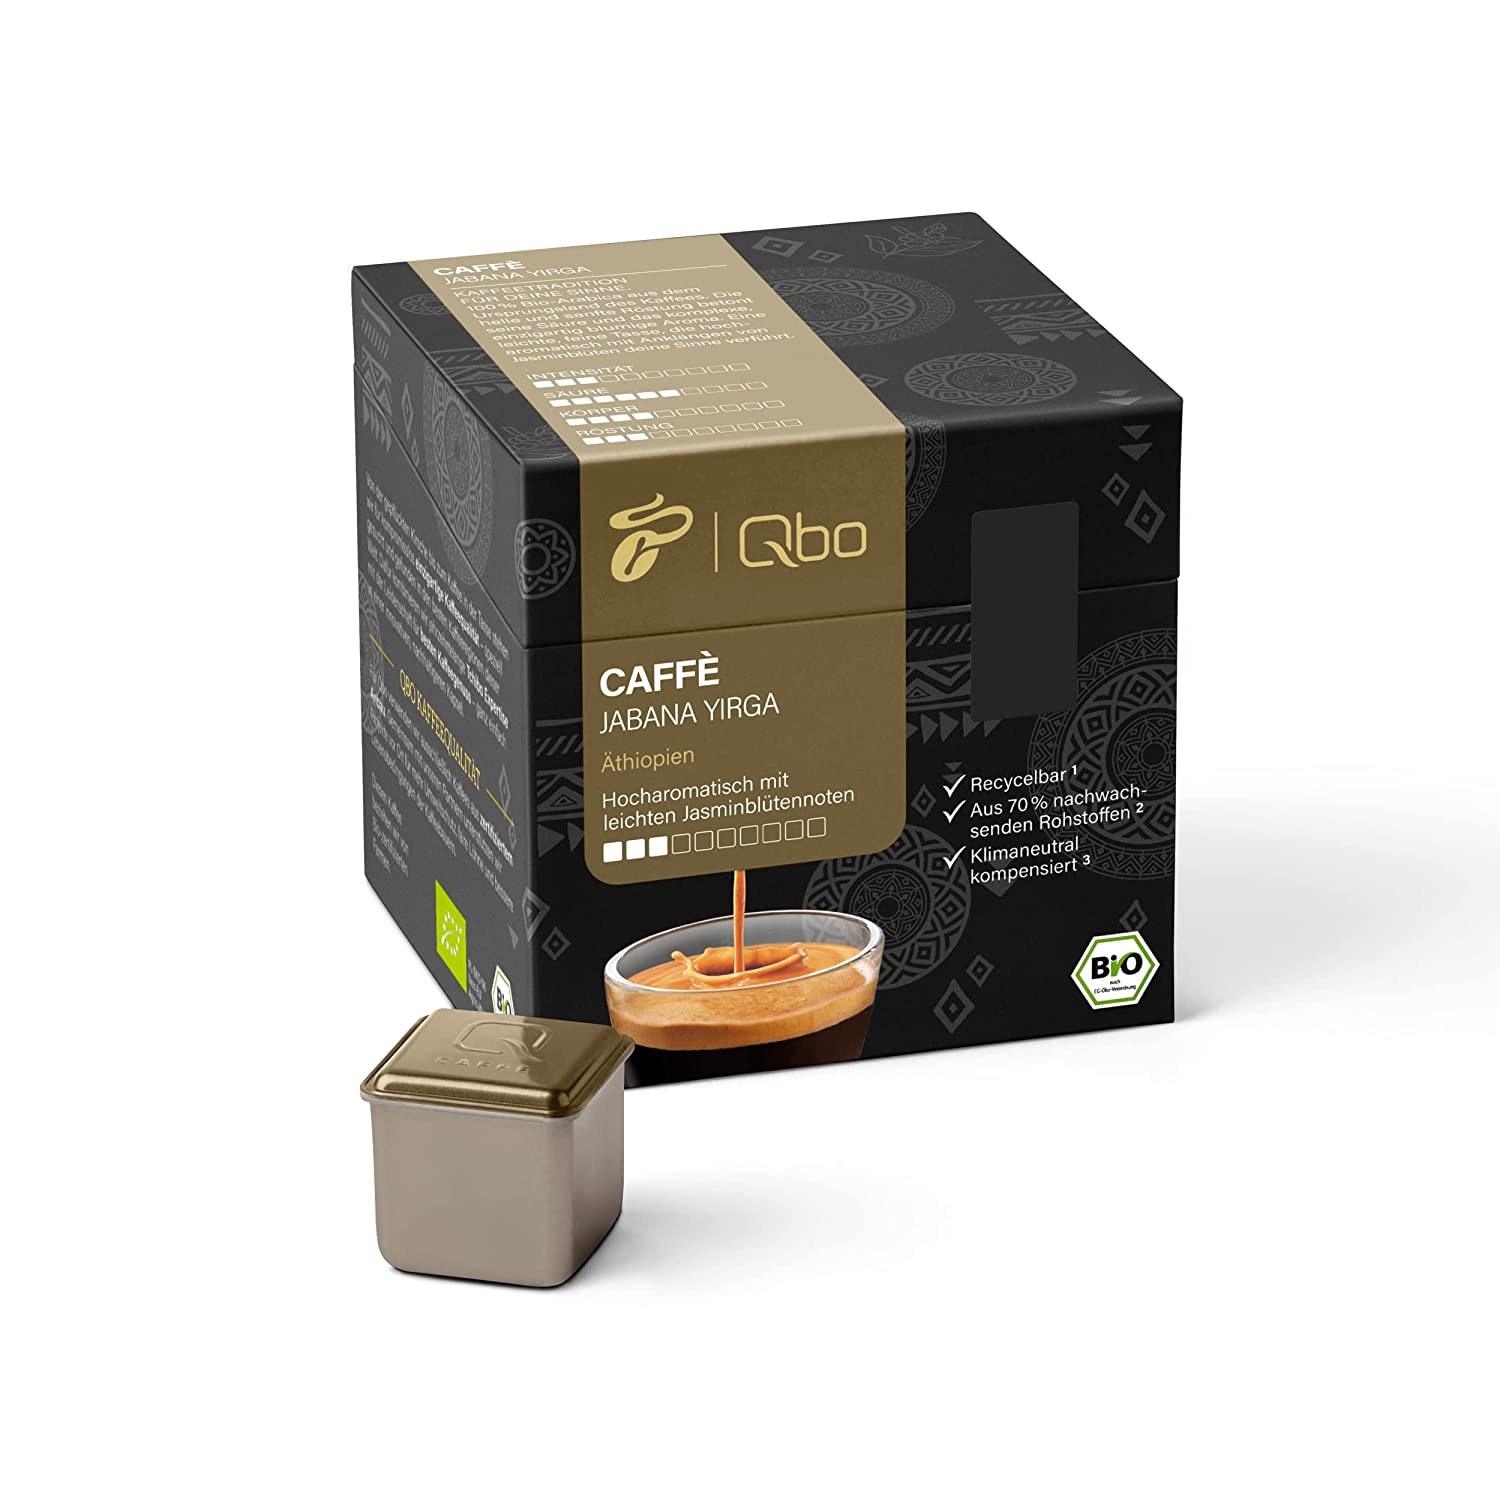 Tchibo qbo Caffè Jabana Yirga Premium coffee capsules, 27 pieces (caffè, intensity 03/10, highly aromatic, jasmine blossom notes), sustainable, from 70% renewable raw materials & climate -neutral